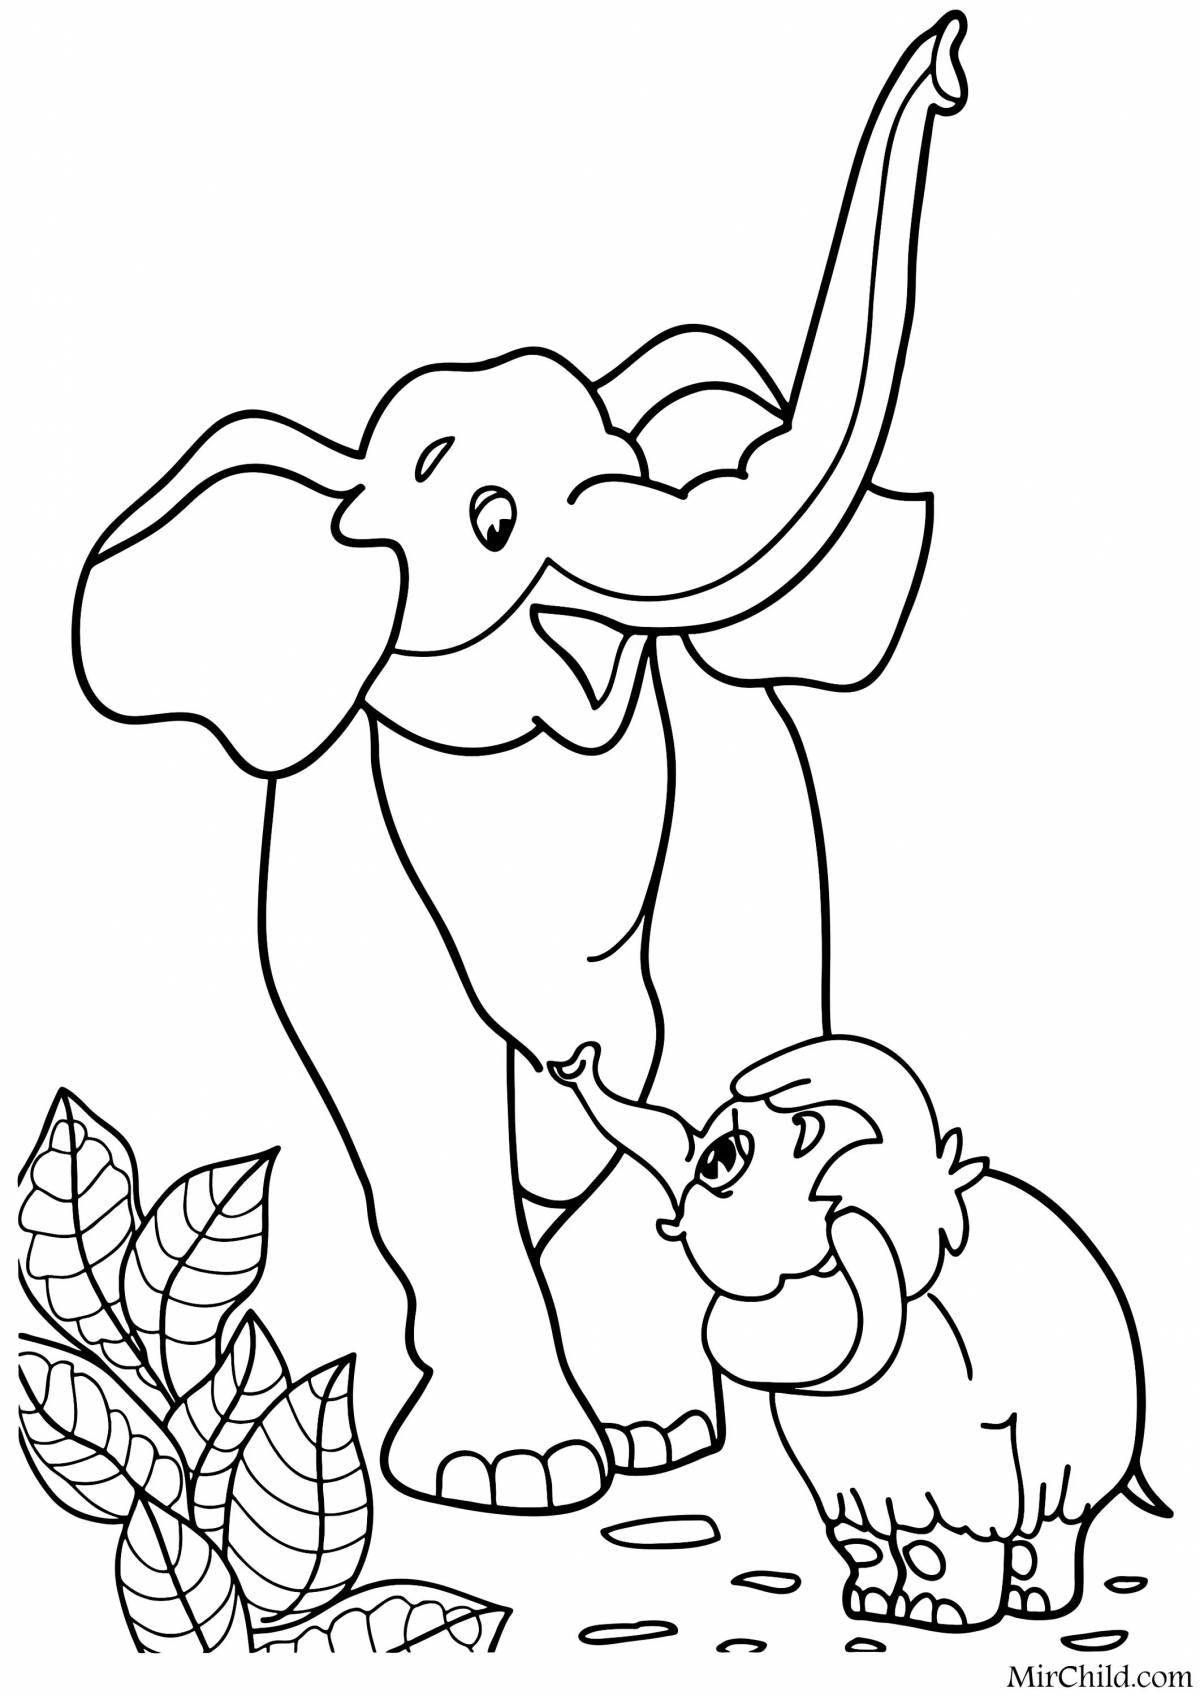 Charming mammoth coloring book for kids